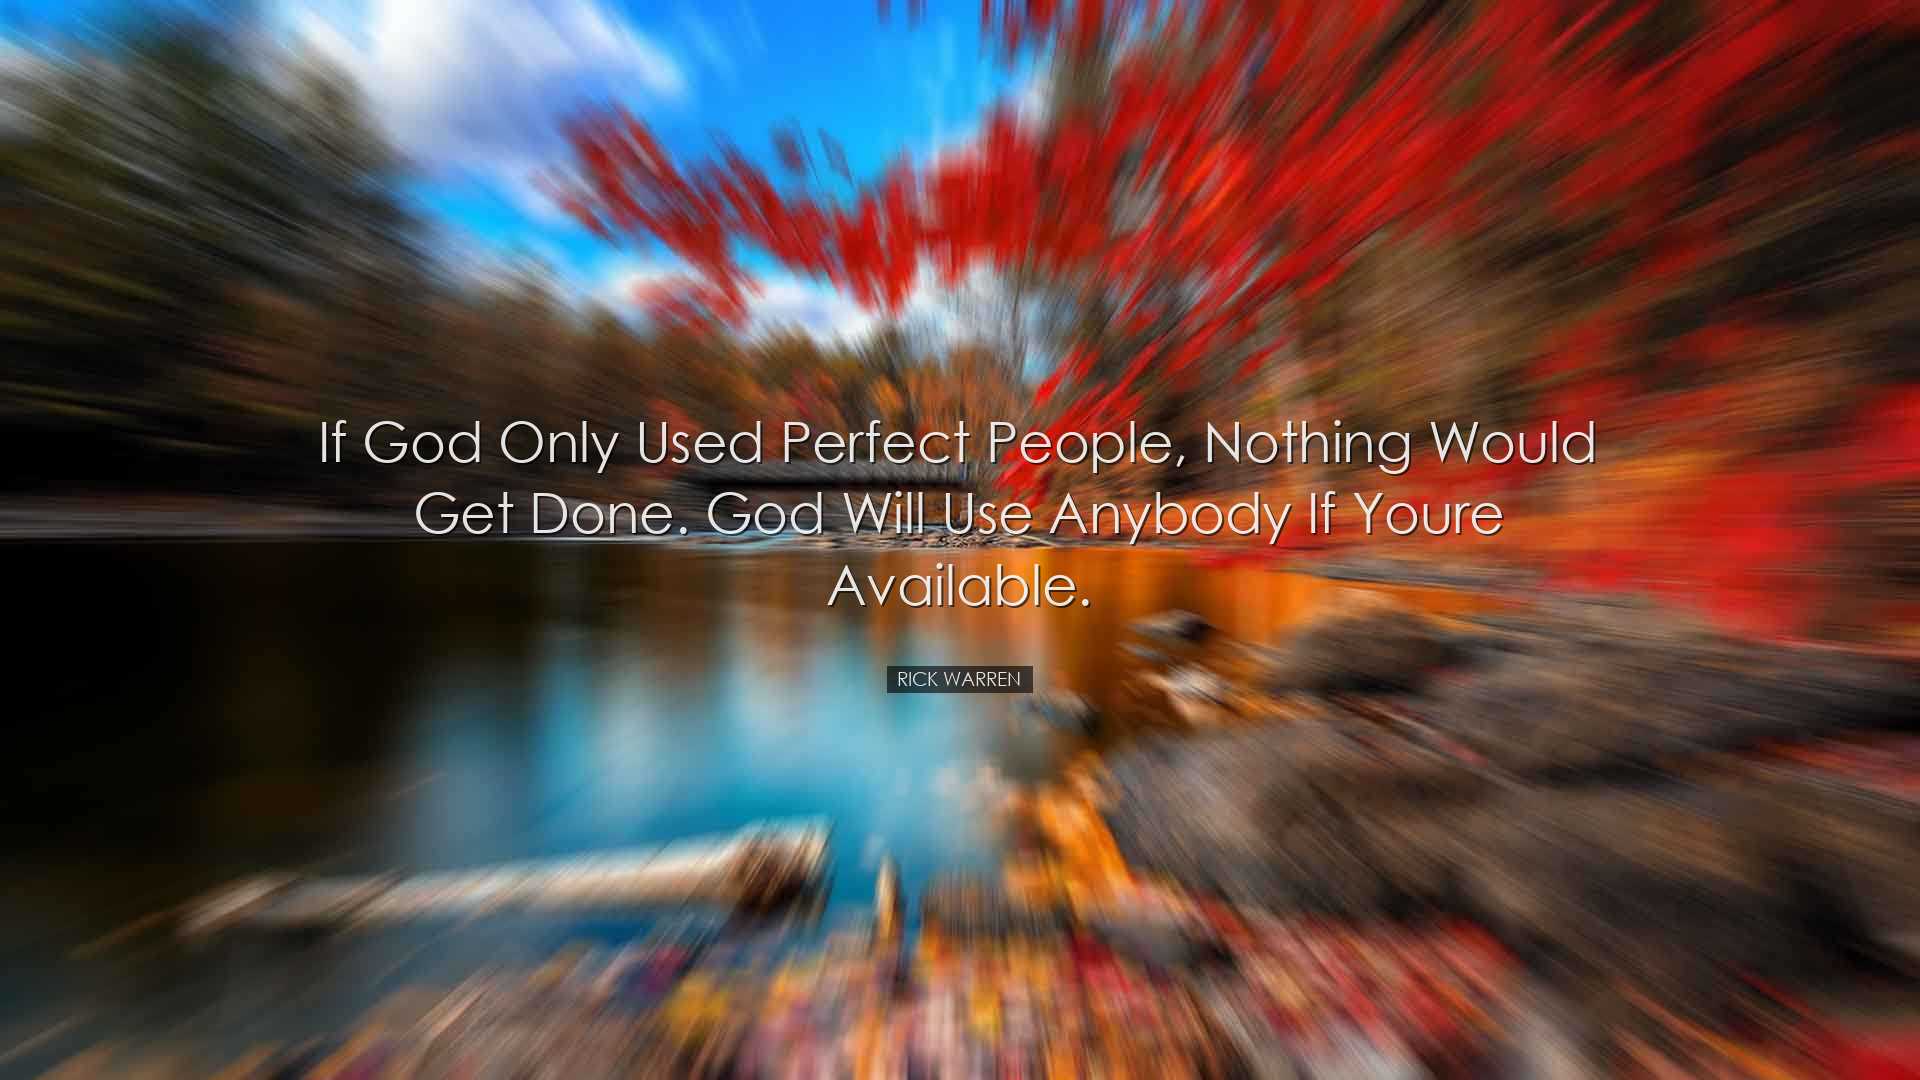 If God only used perfect people, nothing would get done. God will